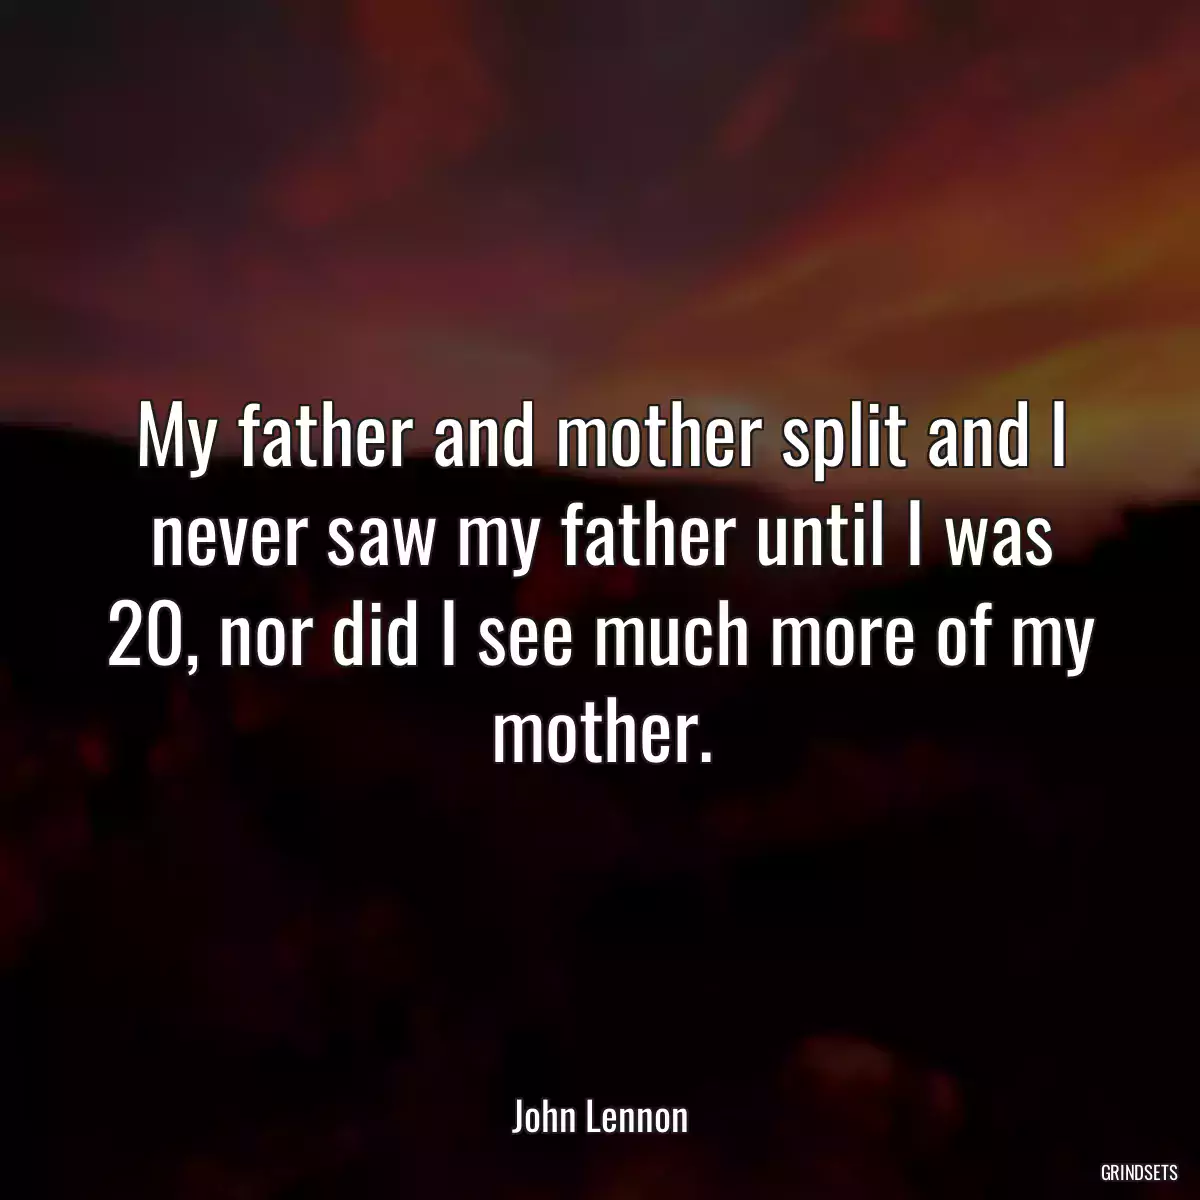 My father and mother split and I never saw my father until I was 20, nor did I see much more of my mother.